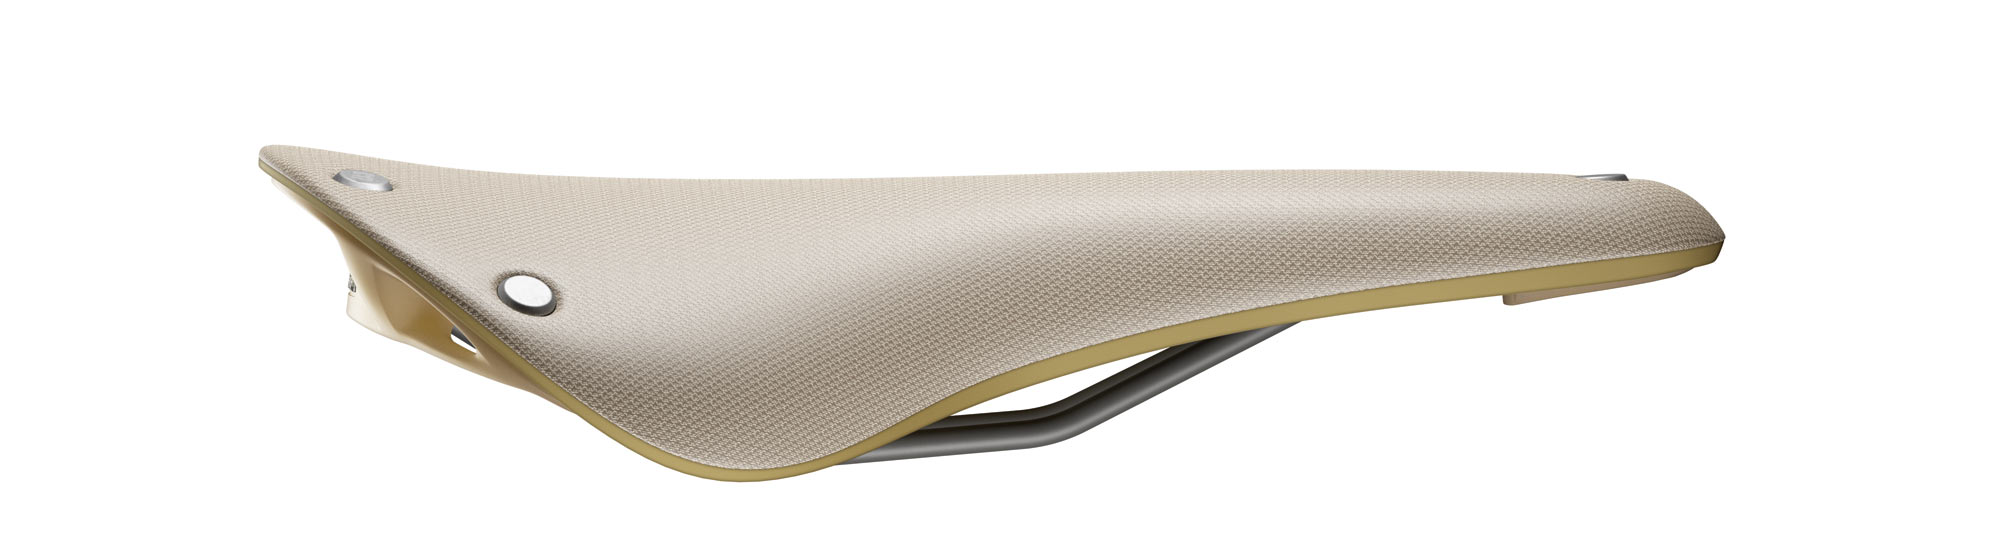 Brooks Cambium C17 Special Recycled Nylon eco-friendly sustainable saddle, natural side